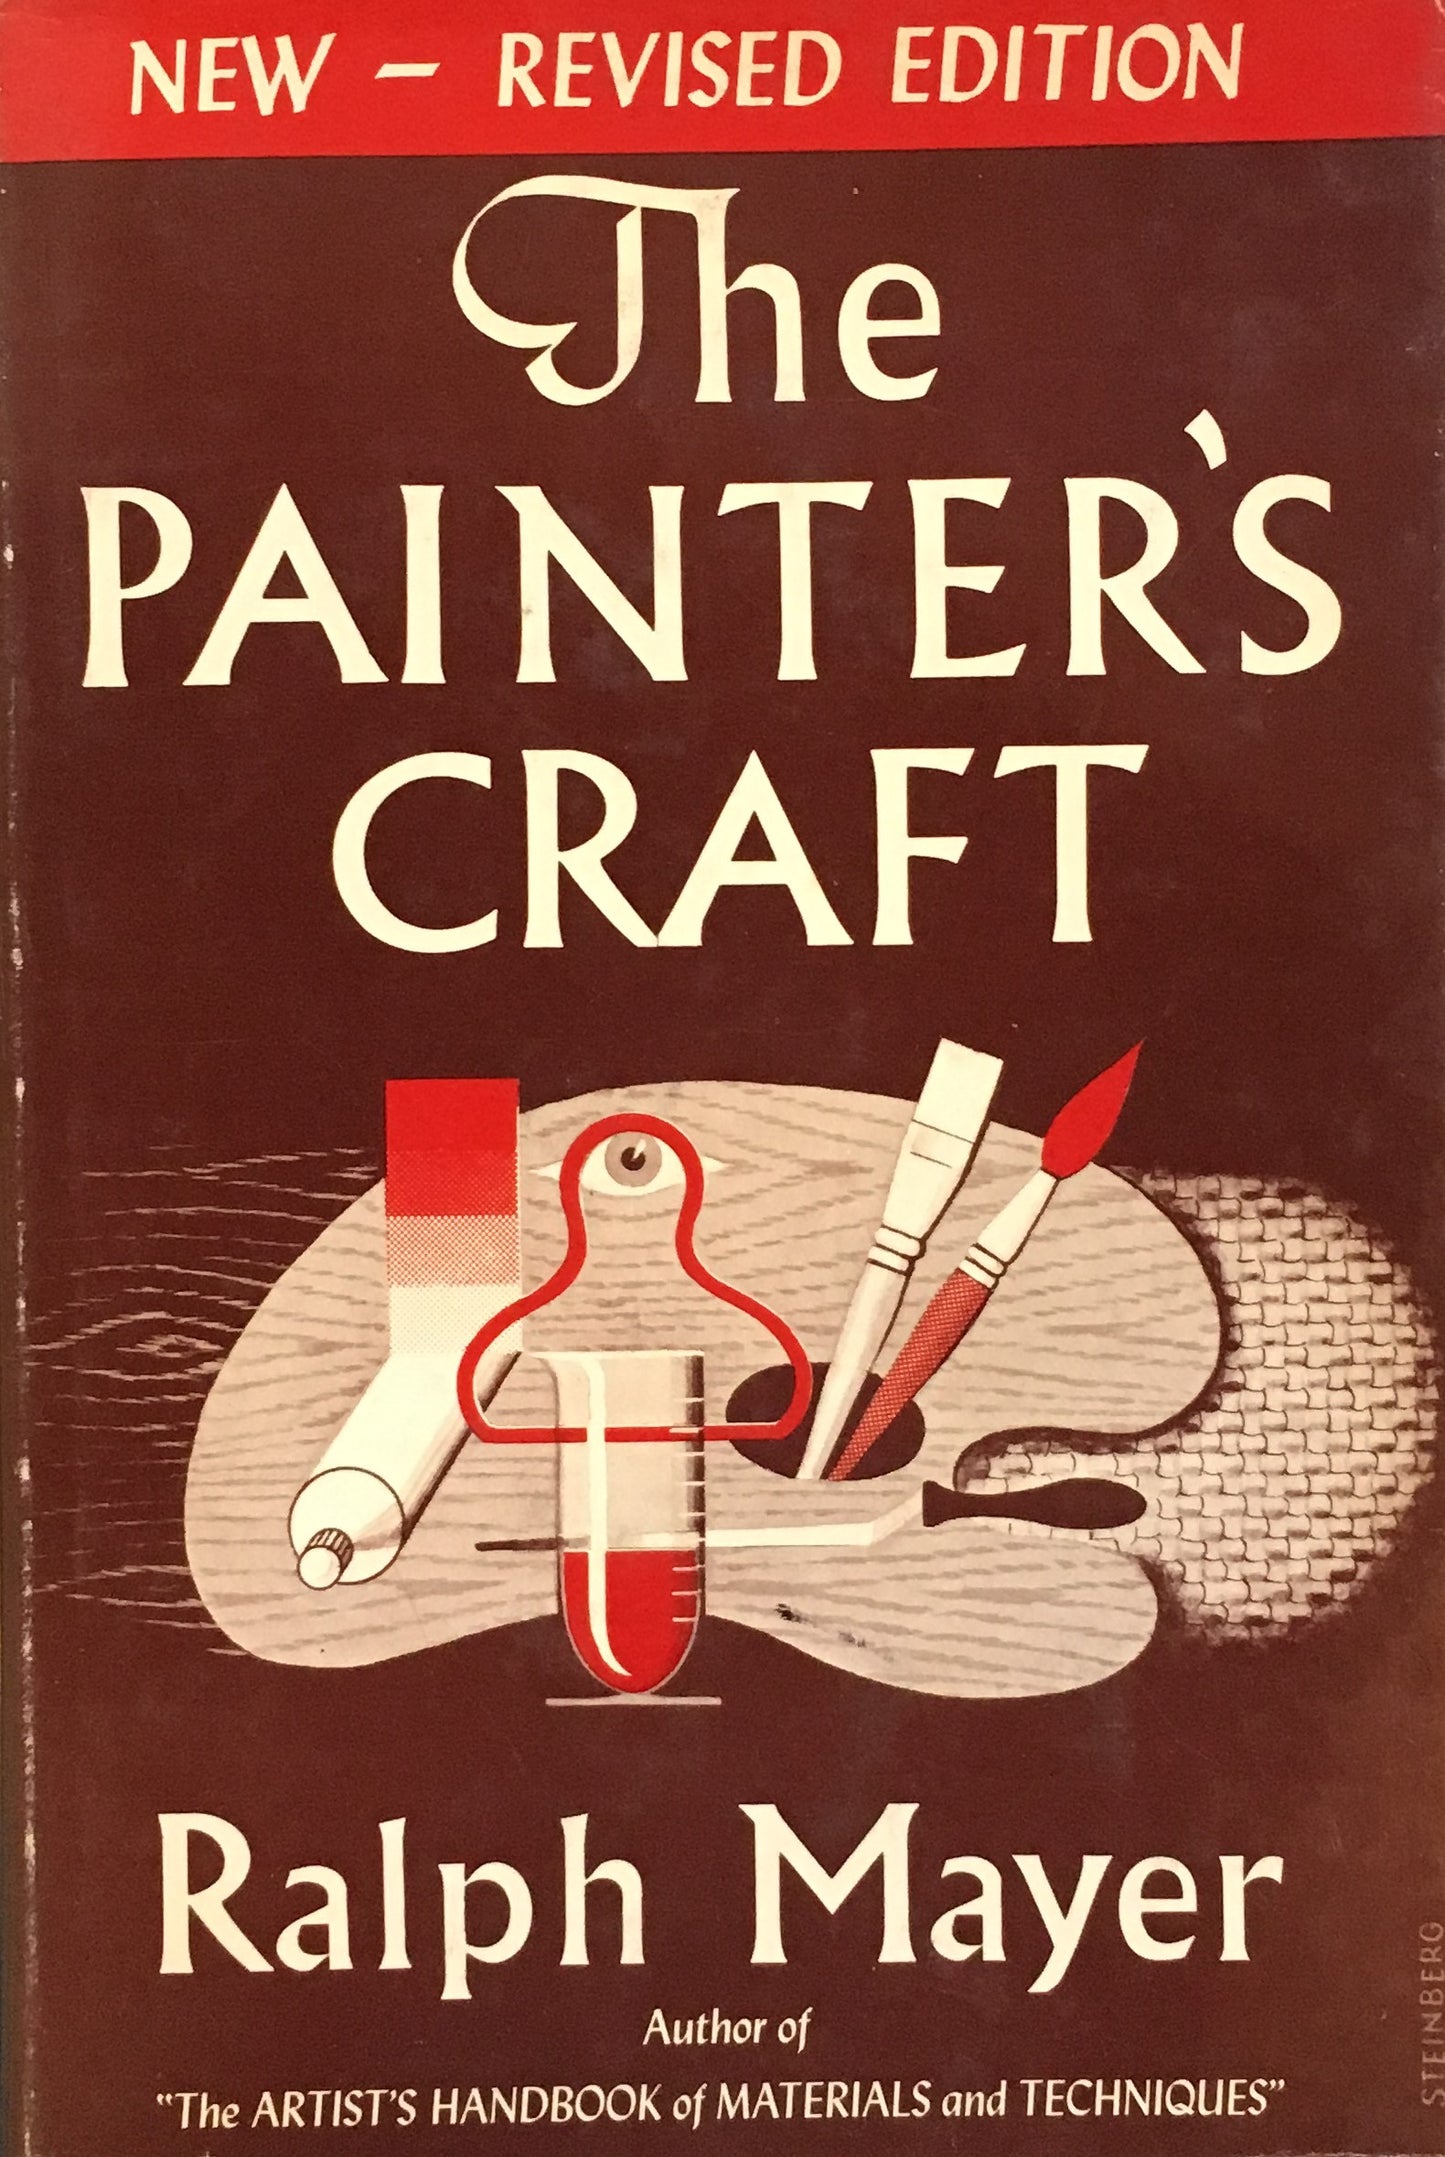 The Painter's Craft Ralph Mayer new revised edition